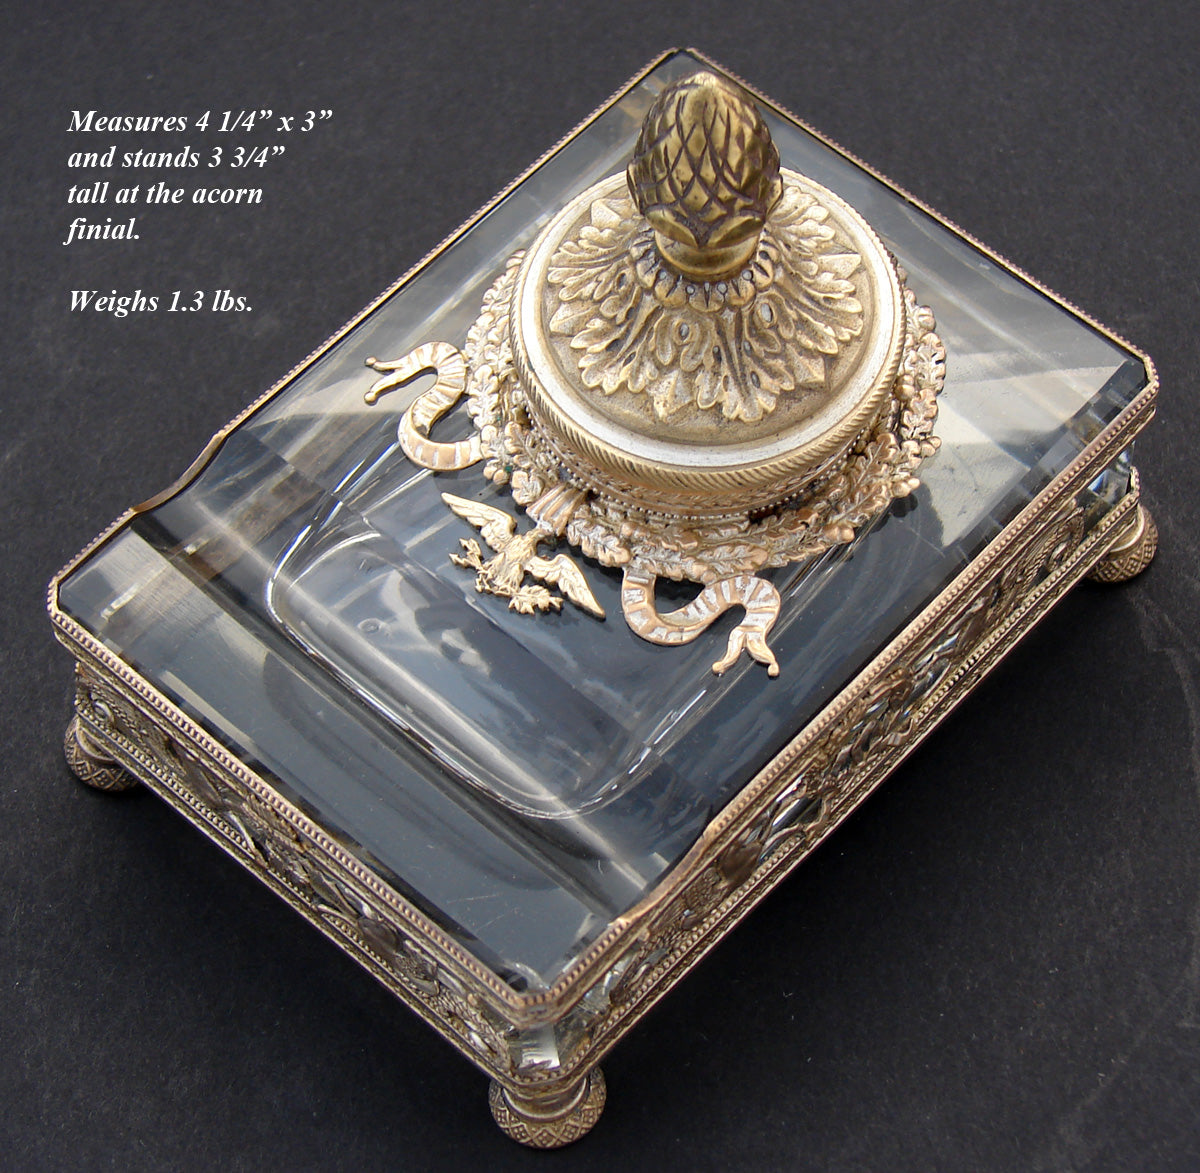 Gorgeous Antique French Empire Revival Inkwell, Gilt Bronze & Thick Wheel Cut Glass, Eagle & Horse Figures